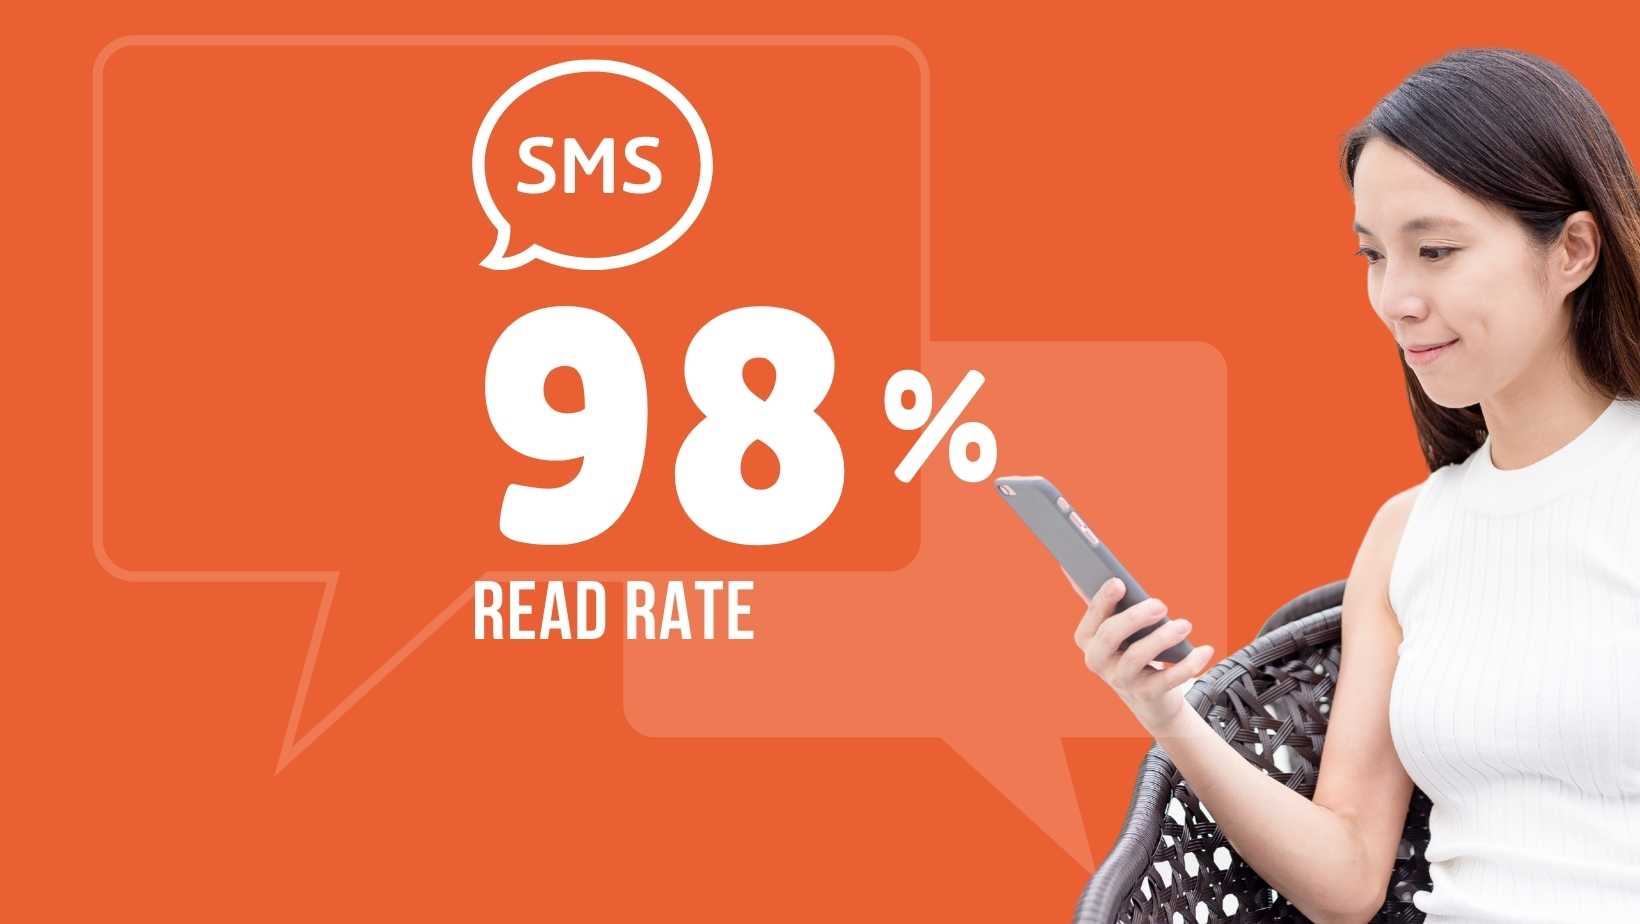 SMS Marketing- Why It's Essential For Your Marketing Strategy